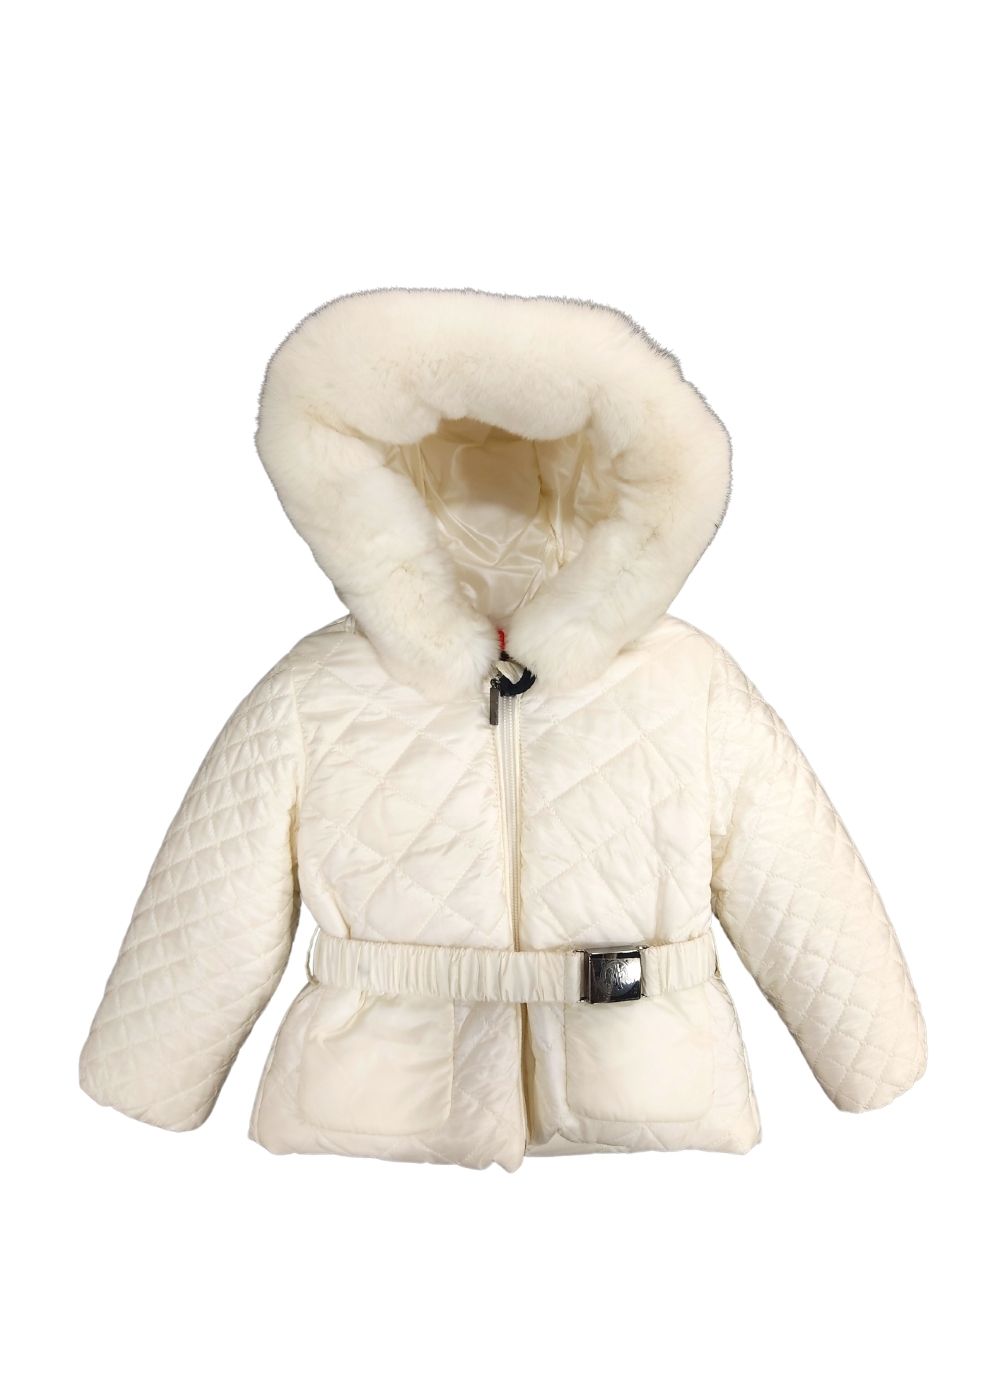 Featured image for “MONCLER PARKA NEONATA”